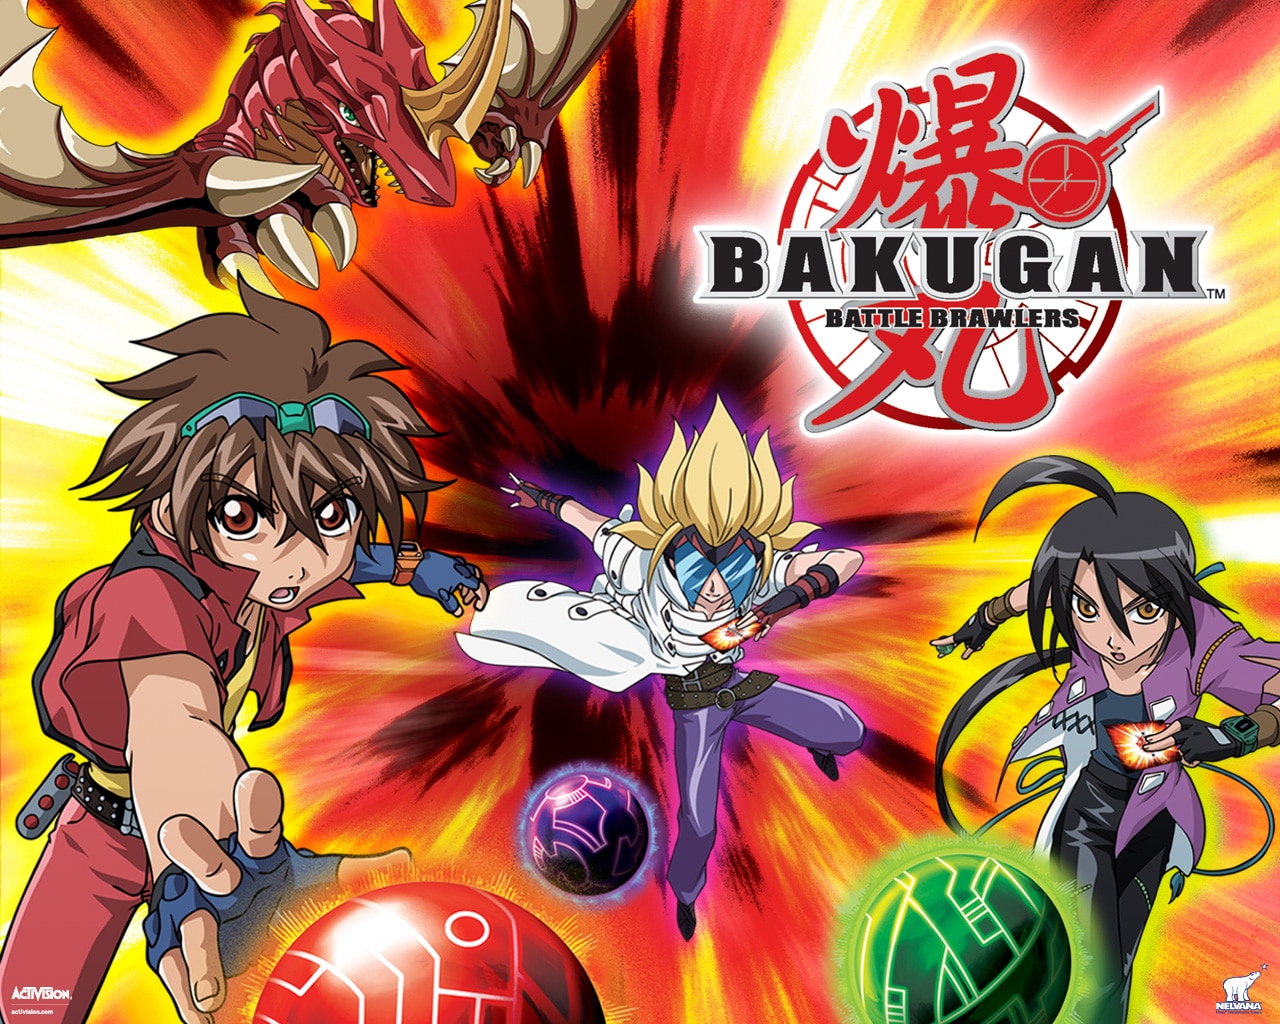 Below you can find the rest of the Bakugan Battle Brawlers wallpapers. 